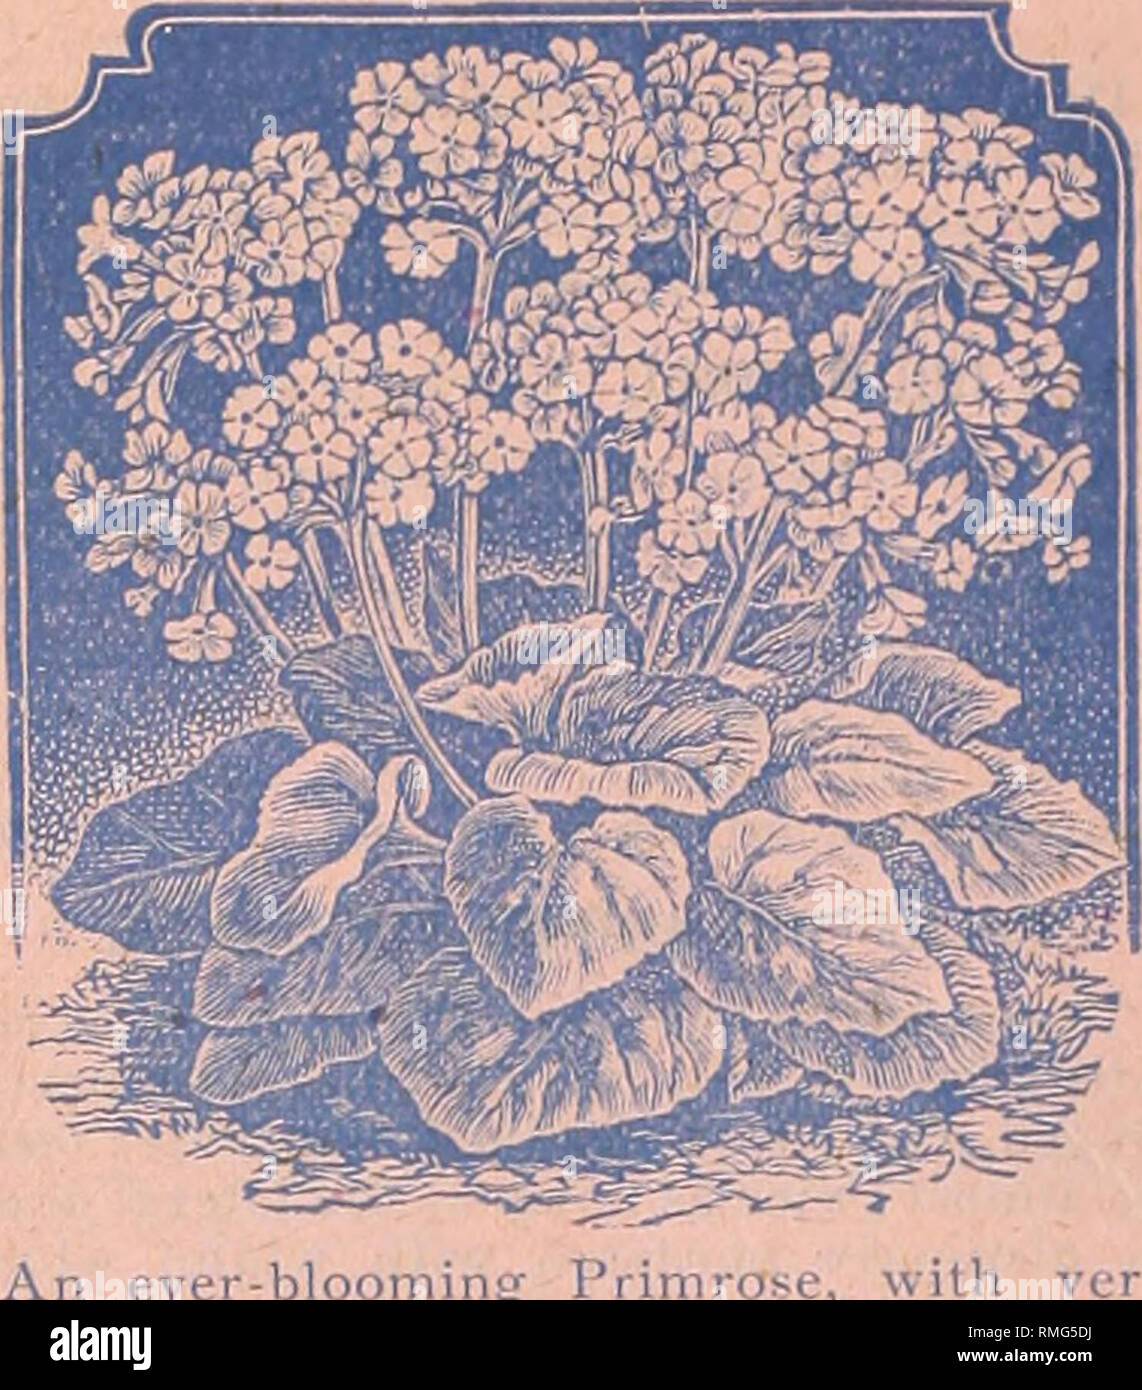 . Annual catalogue : seeds, bulbs, plants, implements, etc. Seed industry and trade; Seeds, Catalogs. J. CHAS. McCULLOUGH, N. E. Cor. 2nd and Walnut Sts., Cincinnati, O. PRIMULA OBCONICA.. SWEET PEAS-Continued. Blanche Ferry—Large pink and white flowjrs of j'.'rfect form on long stem ; plant br^.-chy ana compact. It blooms early, long and profusely. 25c. oz.; 5c. pkt. Princess of Walas—White ground, shaded and striped indigo blue and lavender. 25c. oz.; 5c. pkt. Queen of the Isles—Rose, claret and scar- th white large flowers of fine .; 5c. pkt. -Rich, bright coppery crimson, rosy pink. 25c. o Stock Photo